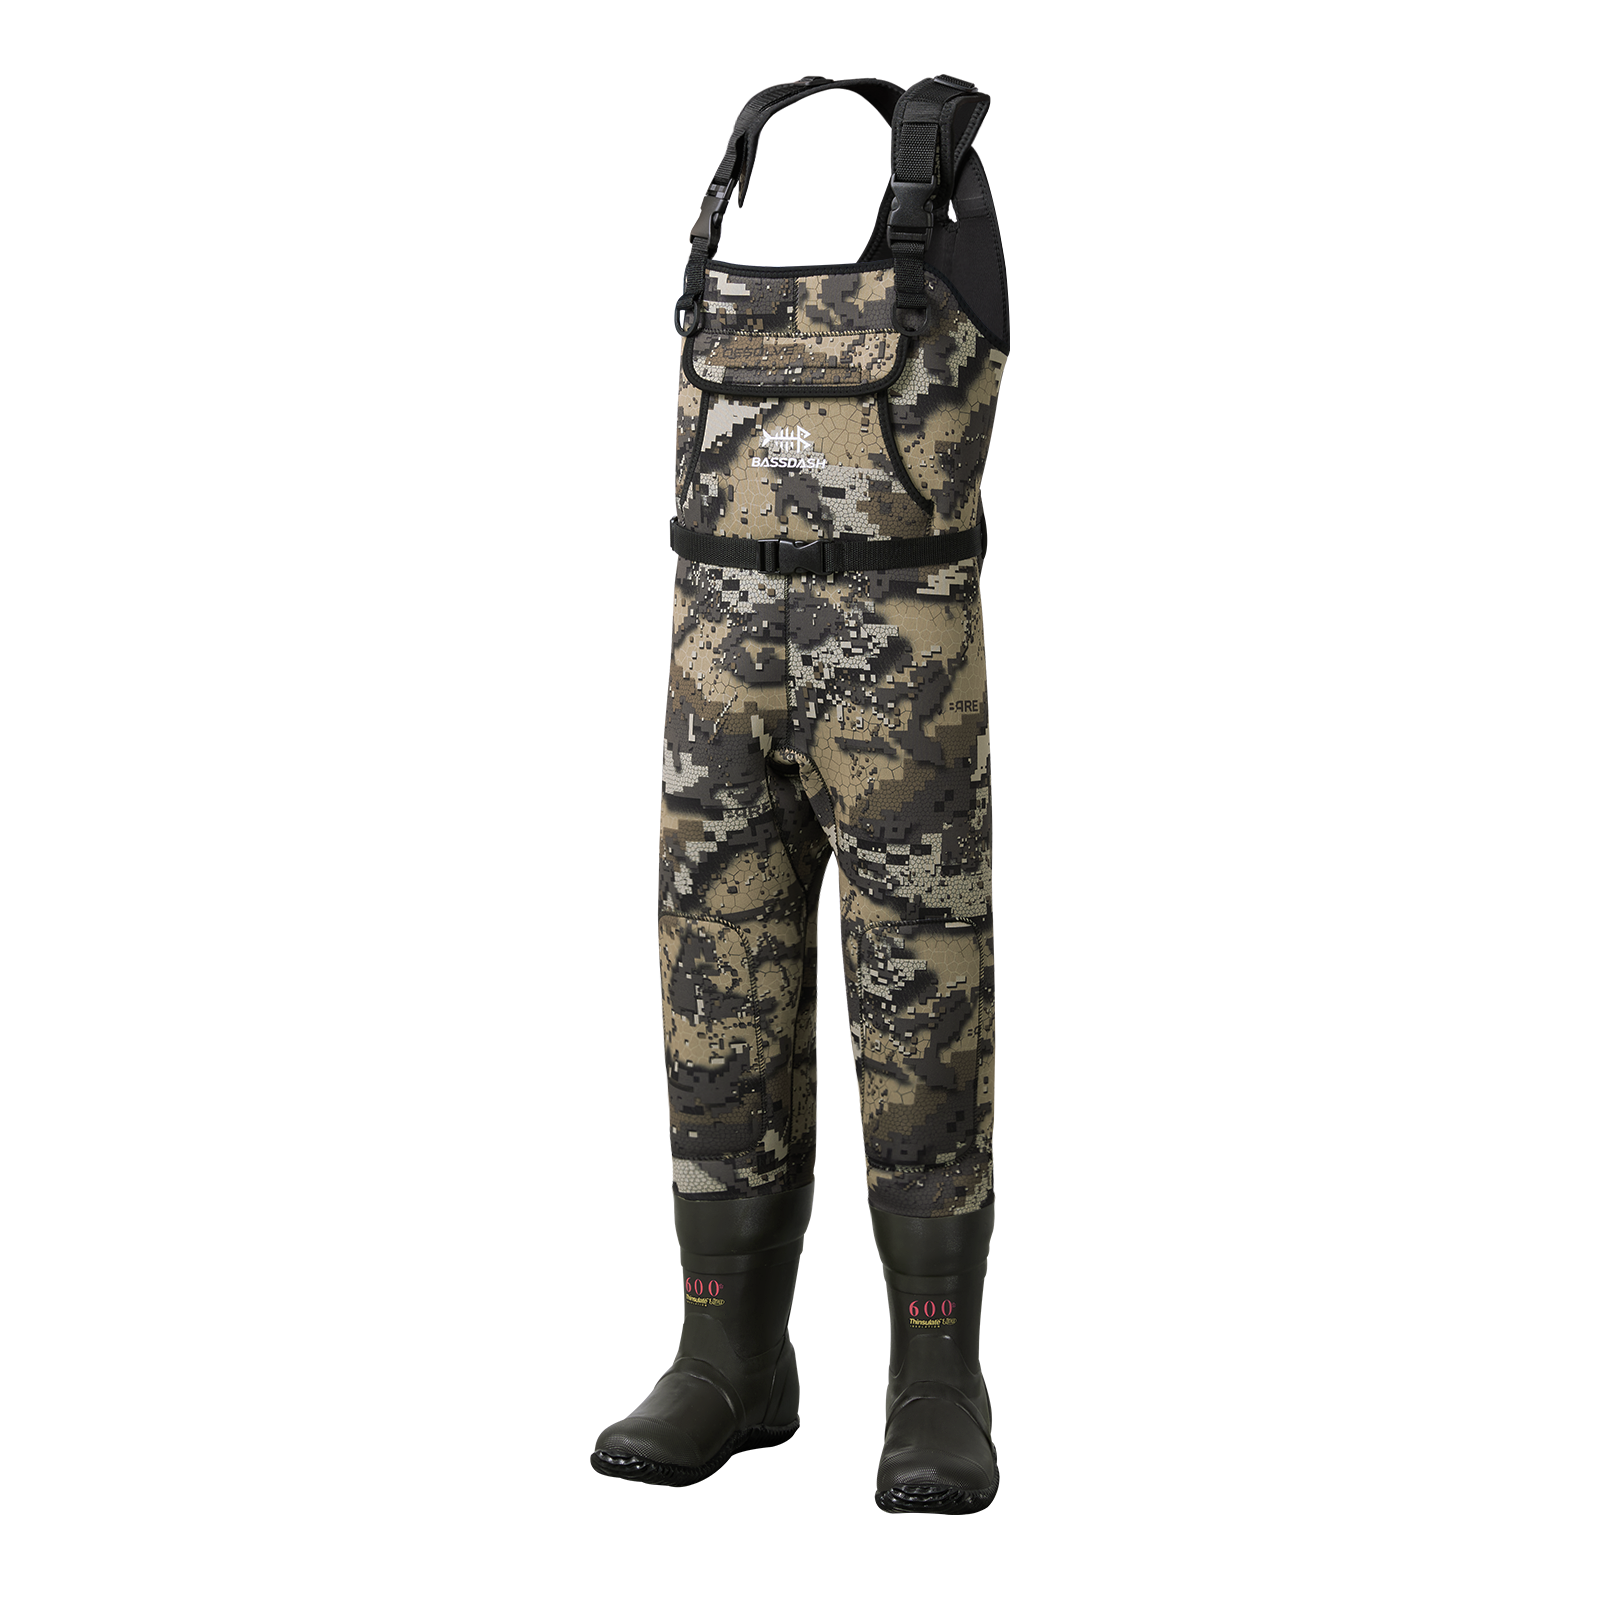 8 Fans Kids Chest Waders with Boots,Neoprene Waterproof Youth